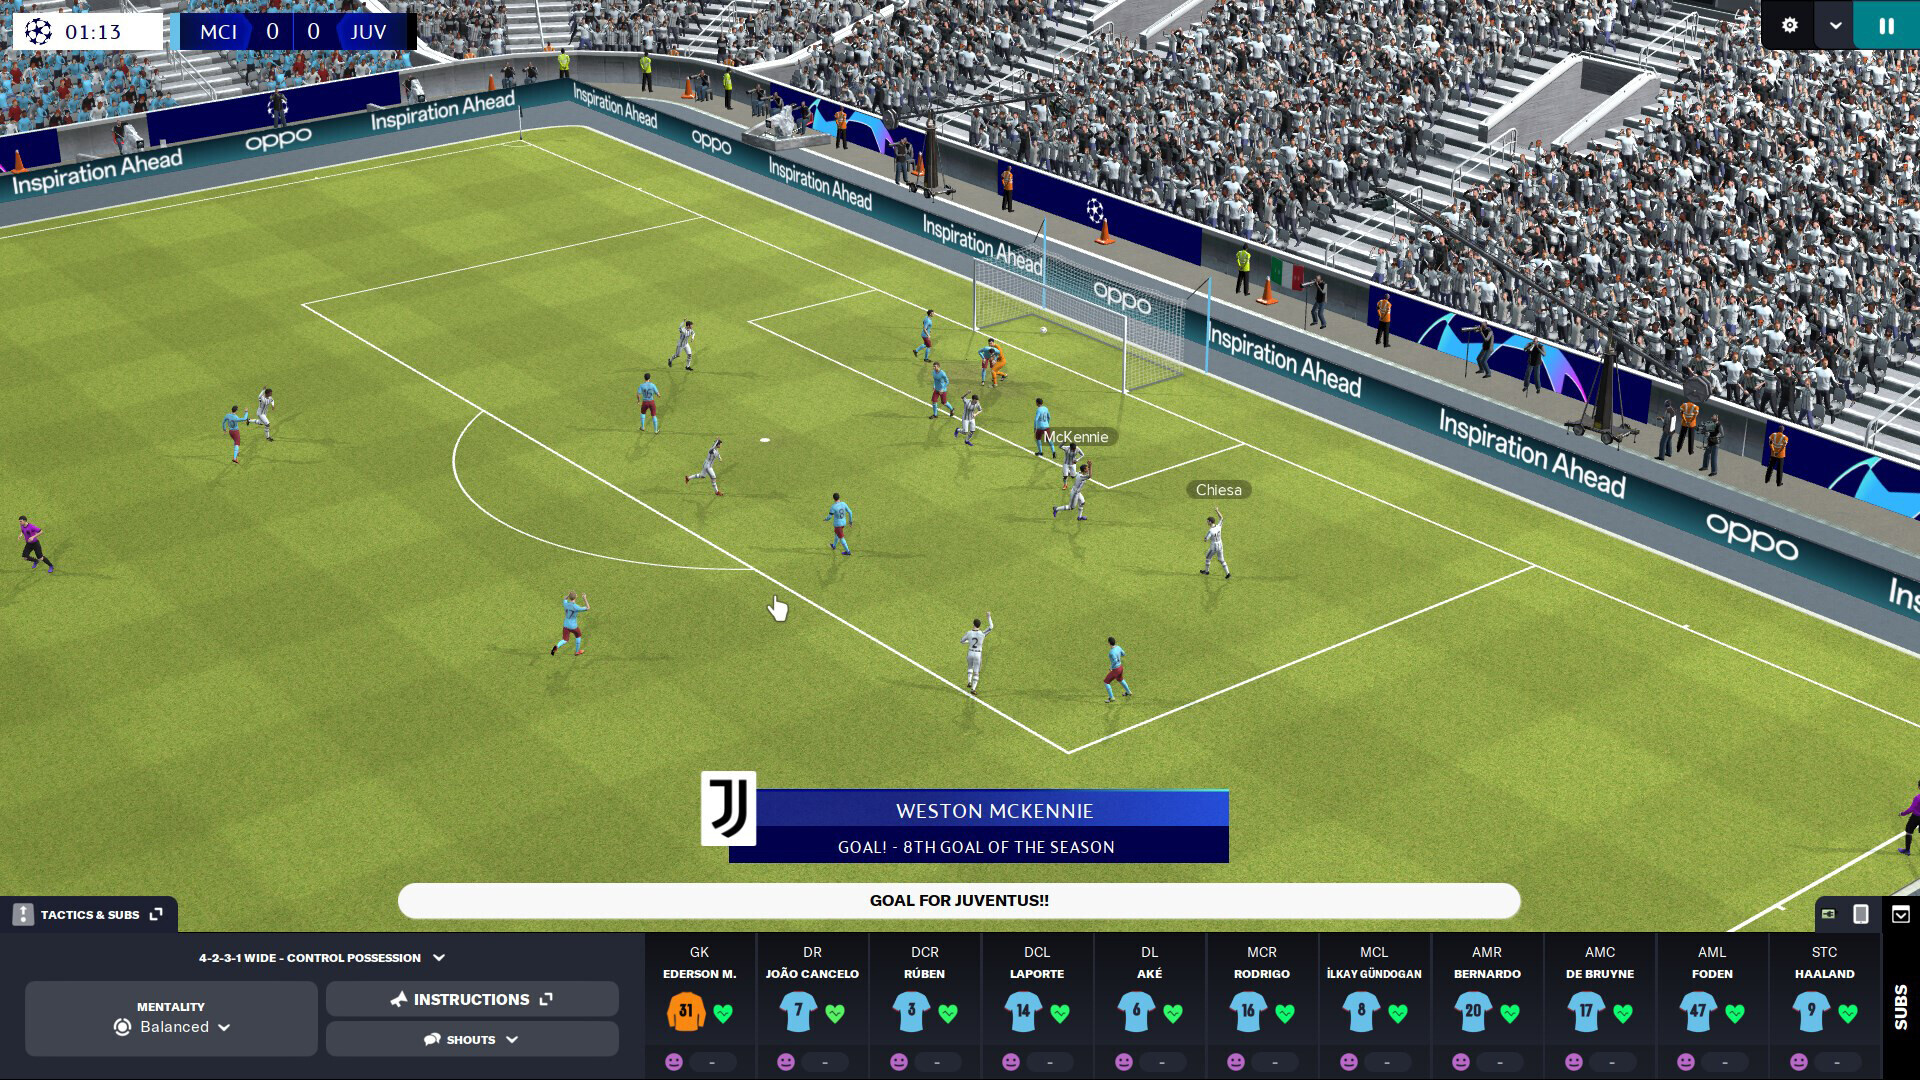 Buy Football Manager 2023 Steam